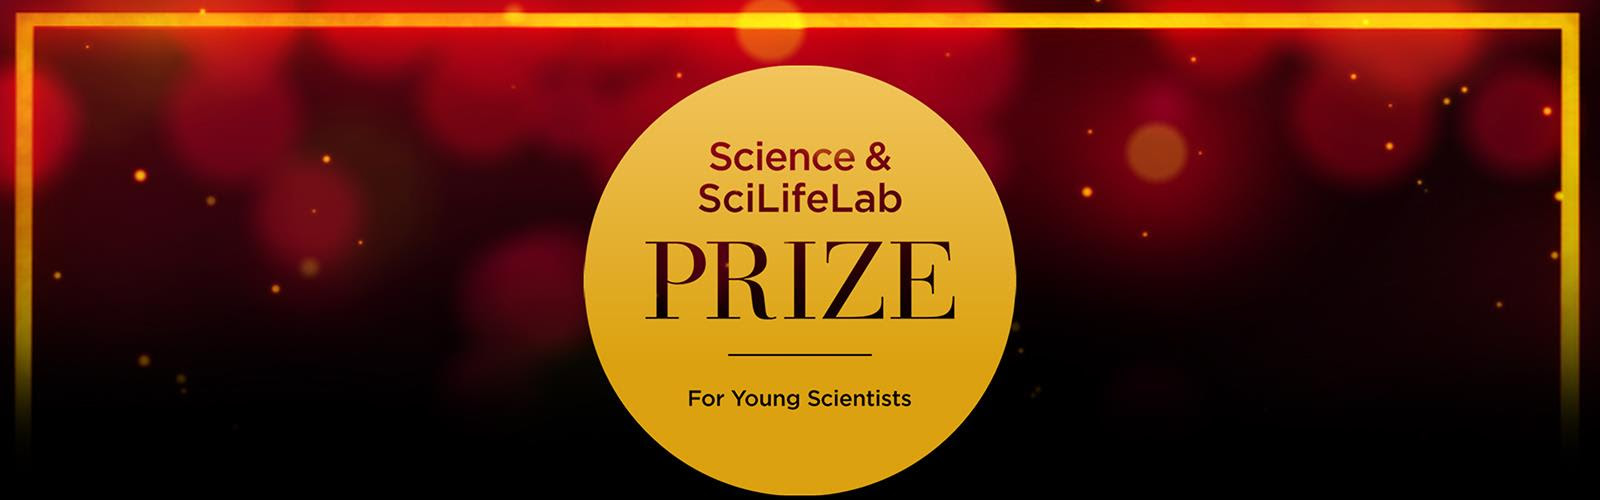 Science & SciLifeLab PRIZE | For Young Scientists